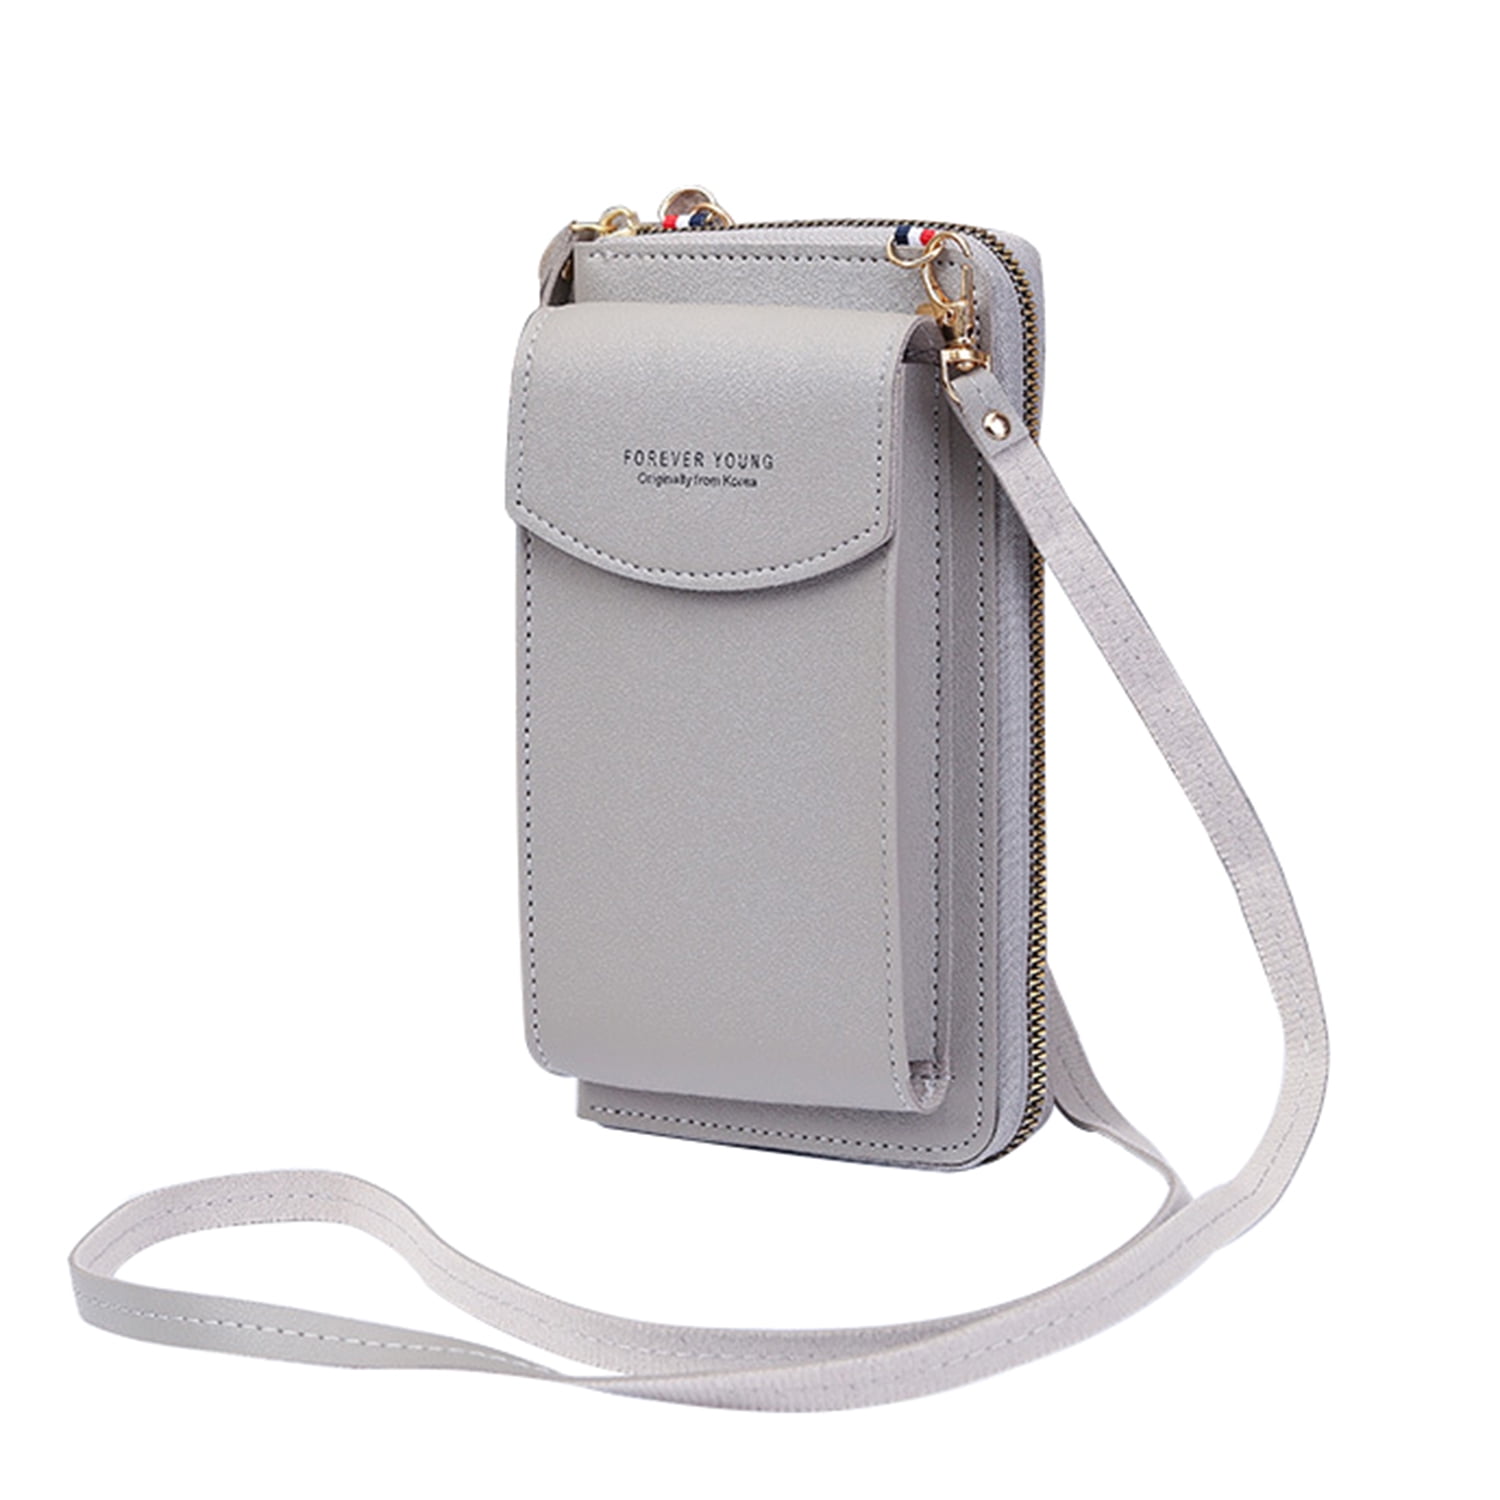 Small Cross Body Bag for Women Crossbody Phone Bag Shoulder Purse Phone  Bags Ladies Handbag Mobile Phone Pouch Cellphone Message Bag Coin Wallet  with Adjustable Detachable Strap, Card Slots(Gray) 